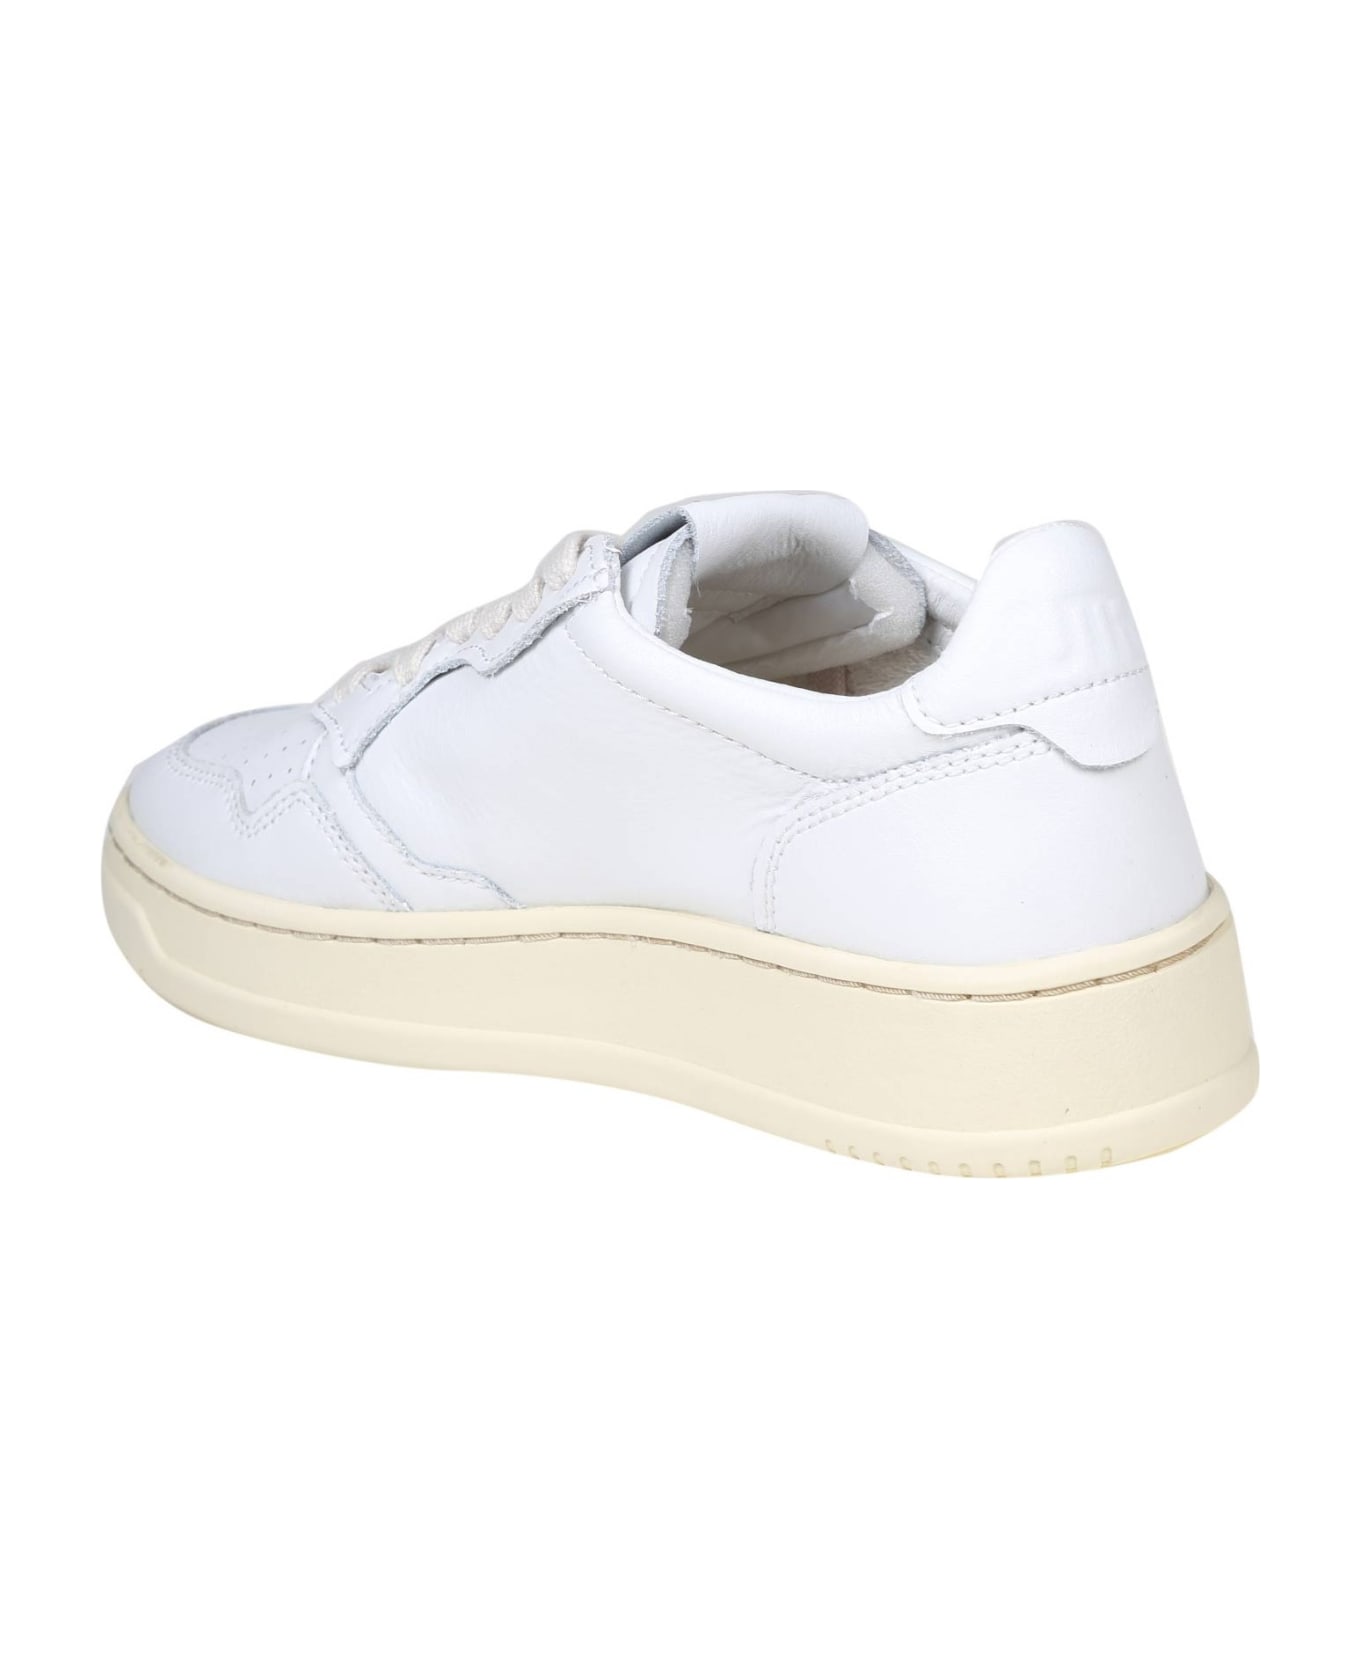 Autry Sneakers In White Leather - White/White